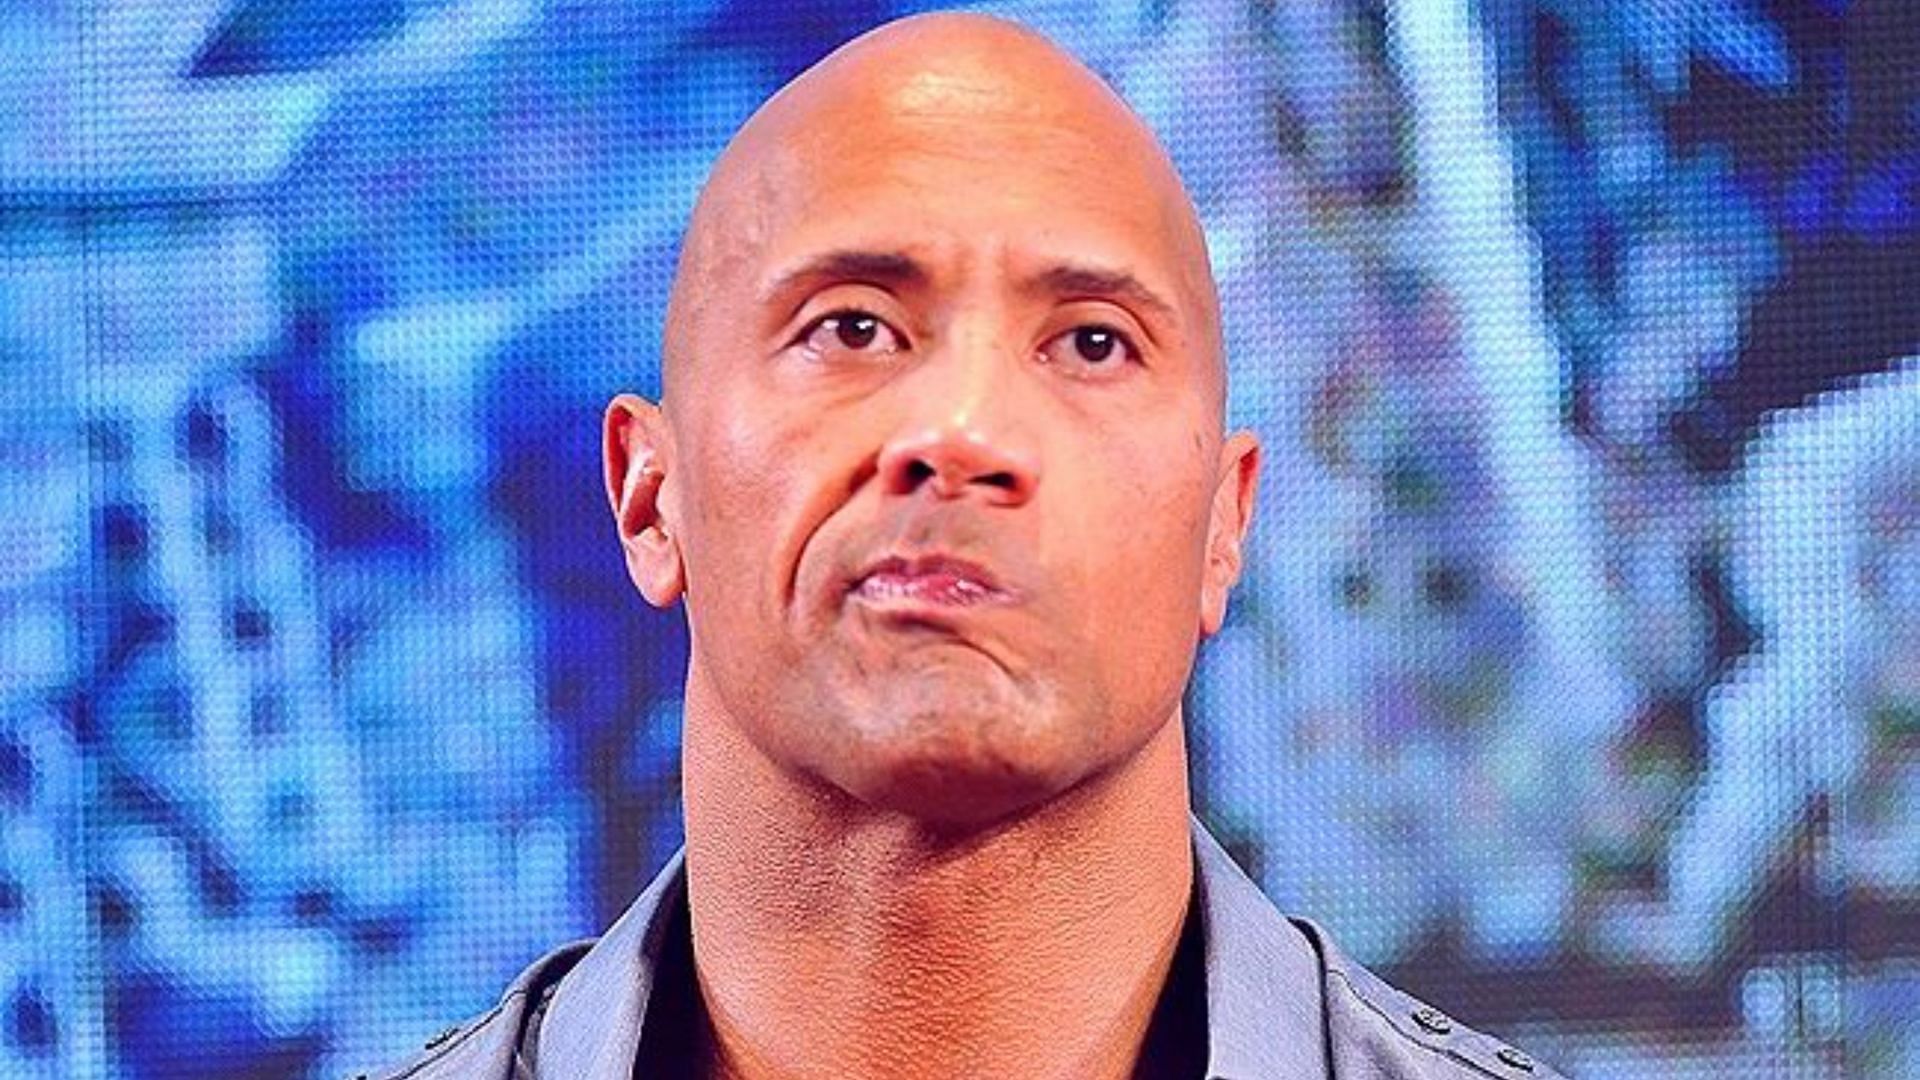 Will The Rock return to WWE in the future?